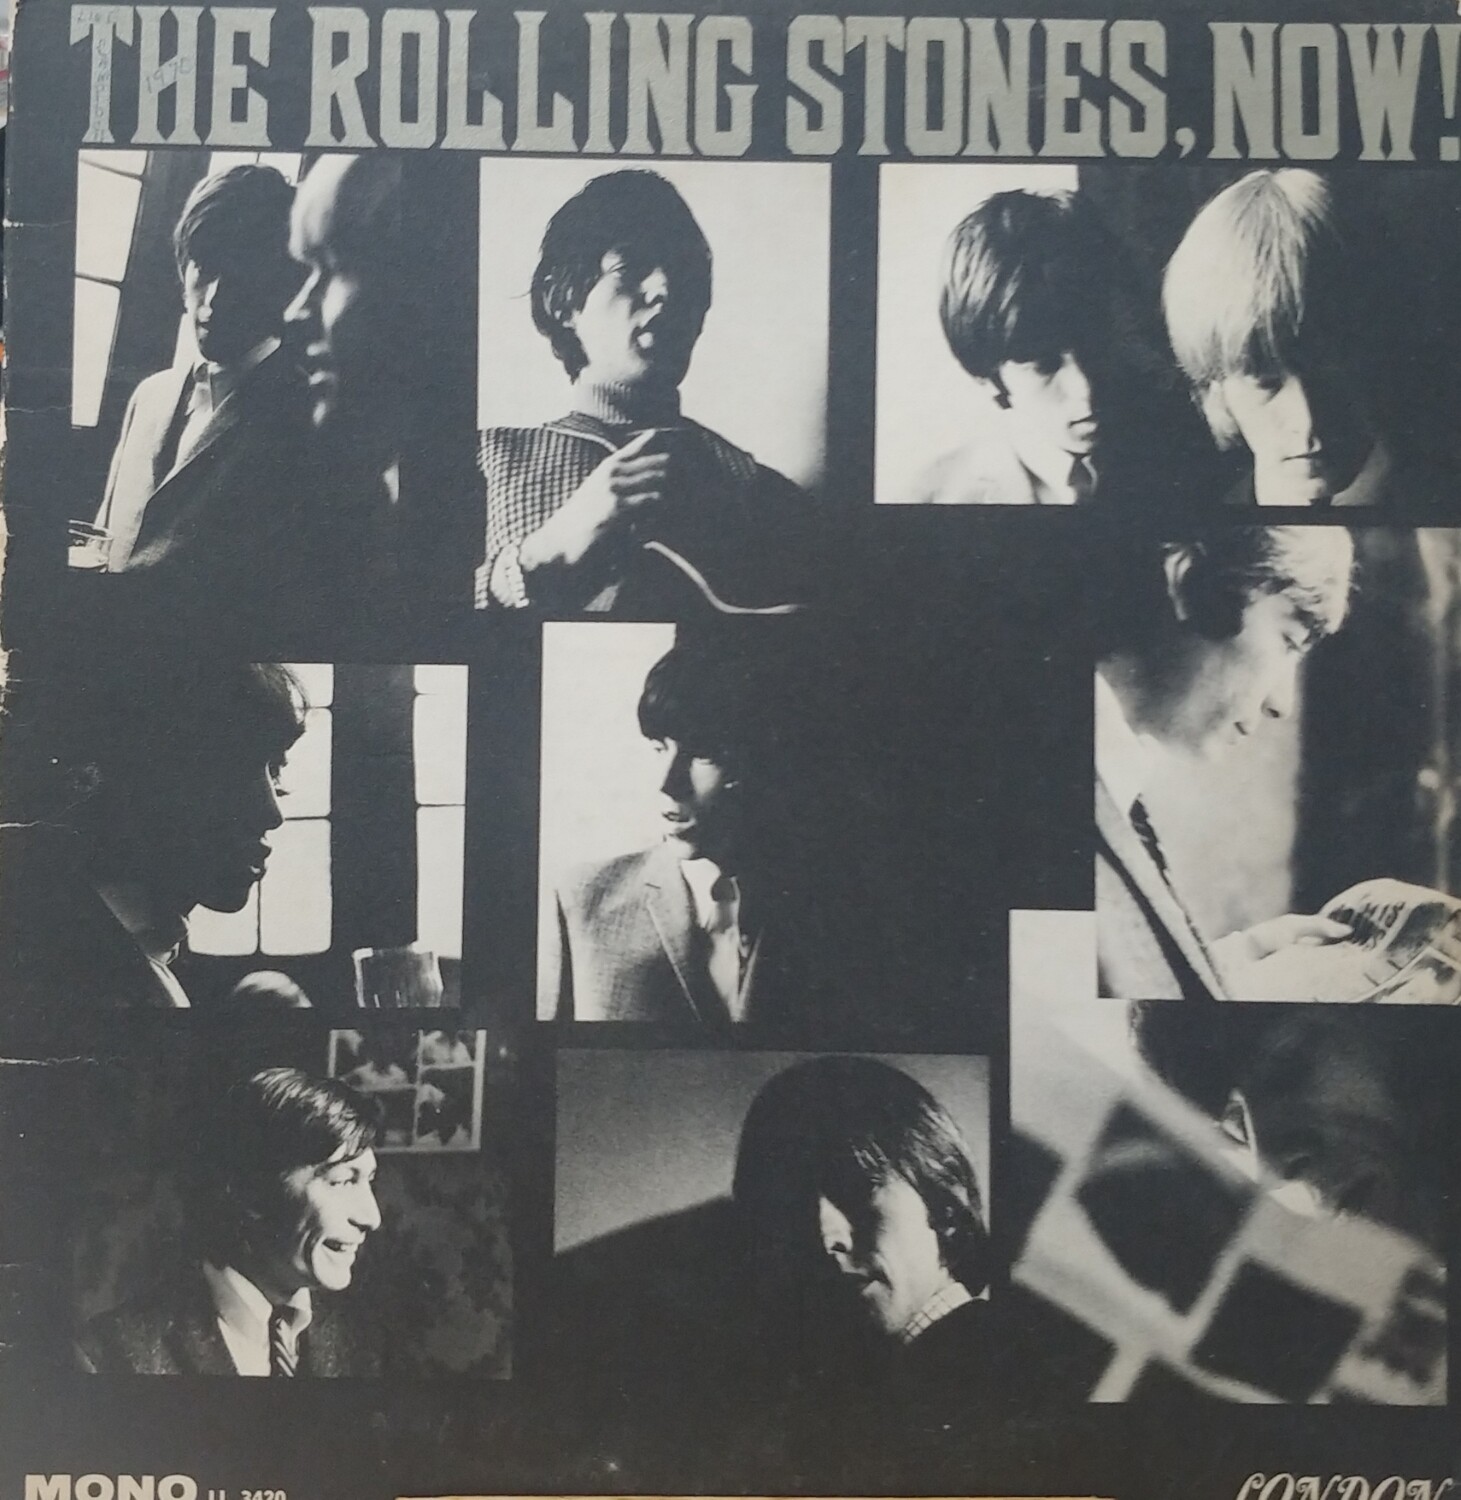 The Rolling Stones - The Rolling Stones Now